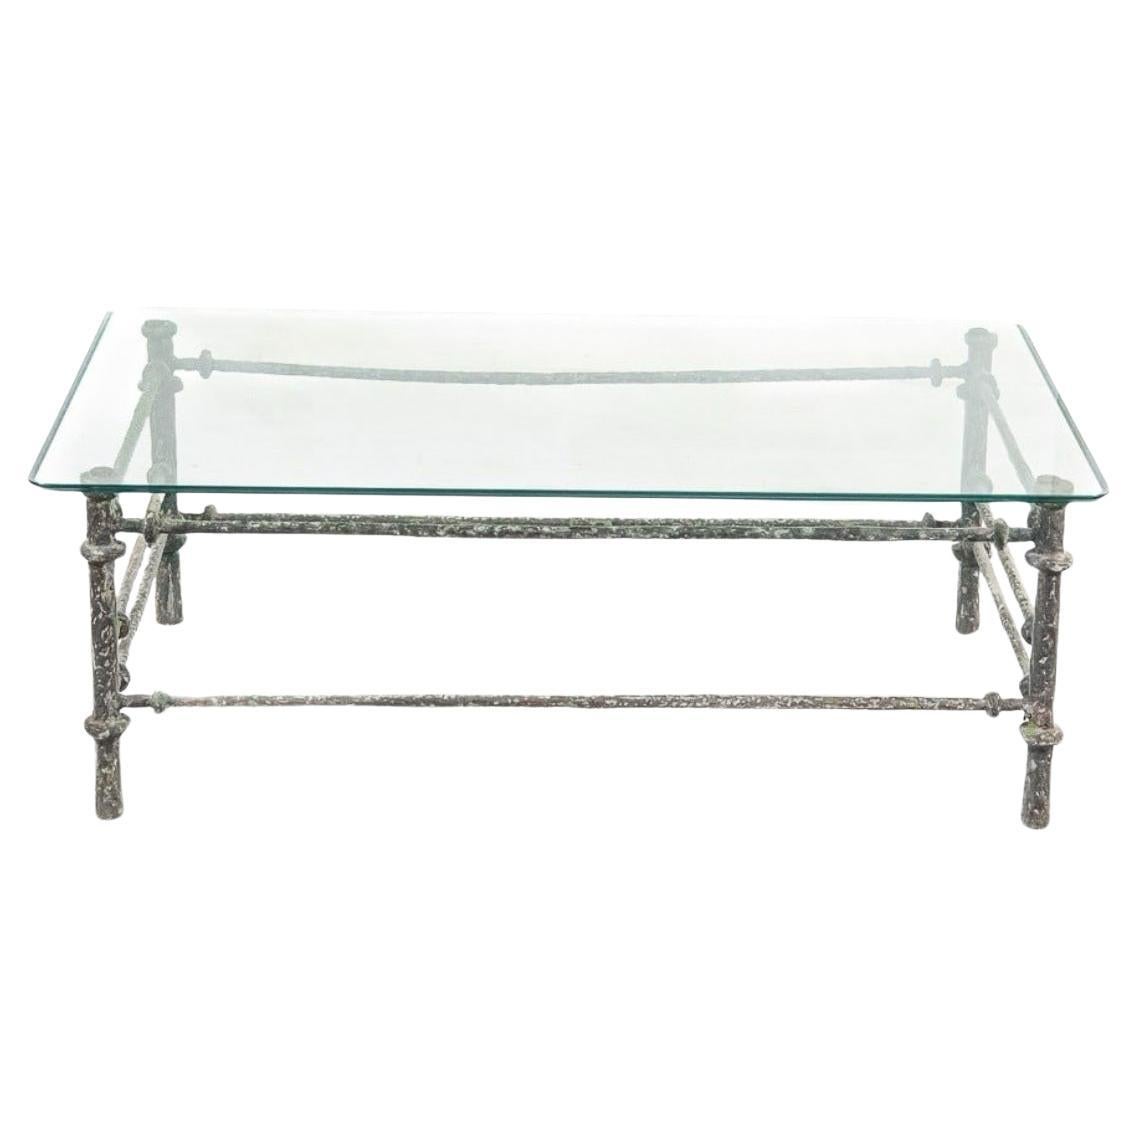 Circa 1980 Patinated Hammered Wrought Iron Coffee Table After Diego Giacometti.